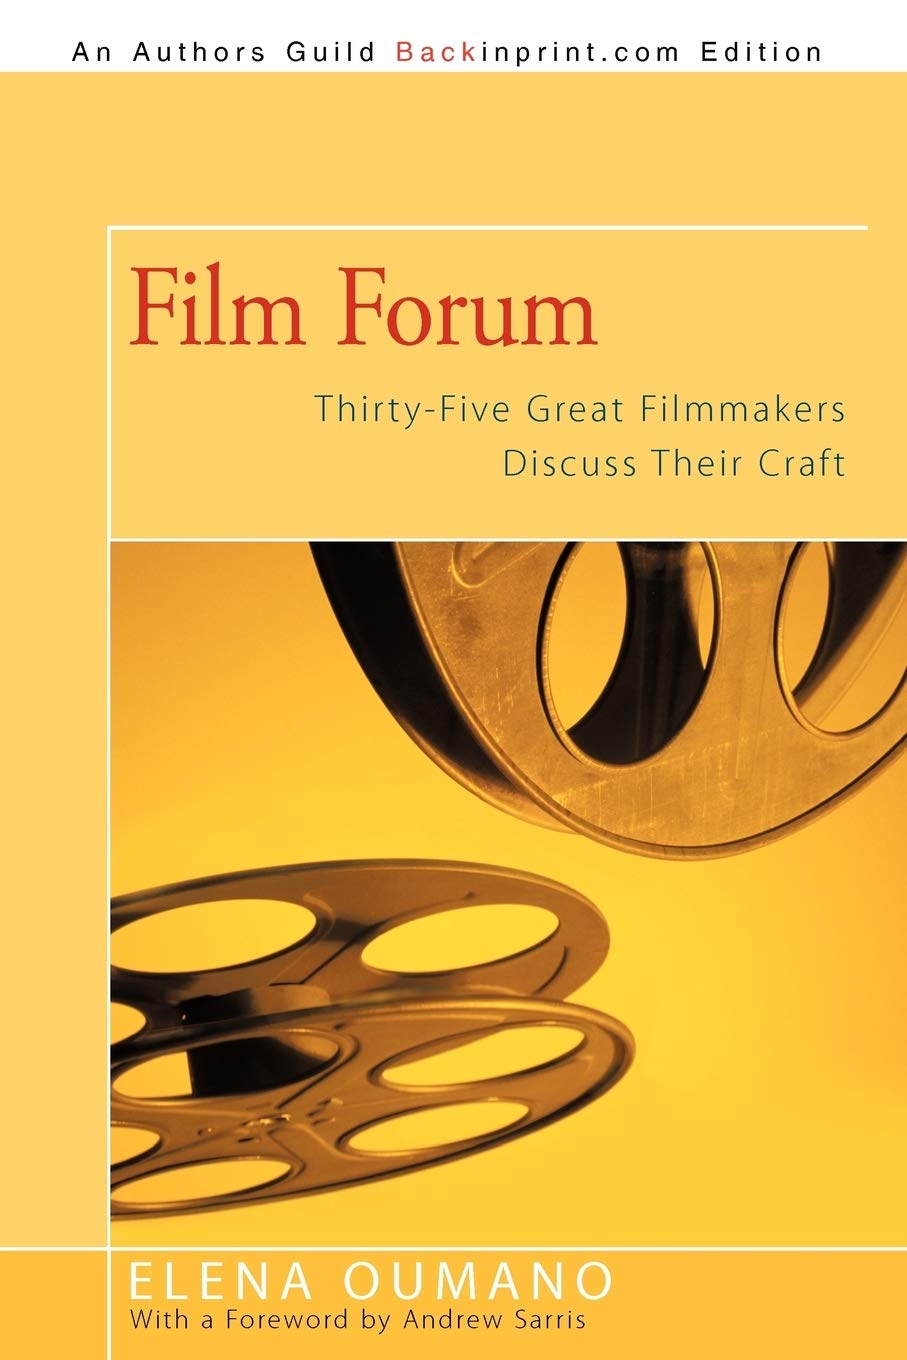 Film Forum: Thirty-Five Great Filmmakers Discuss Their Craft